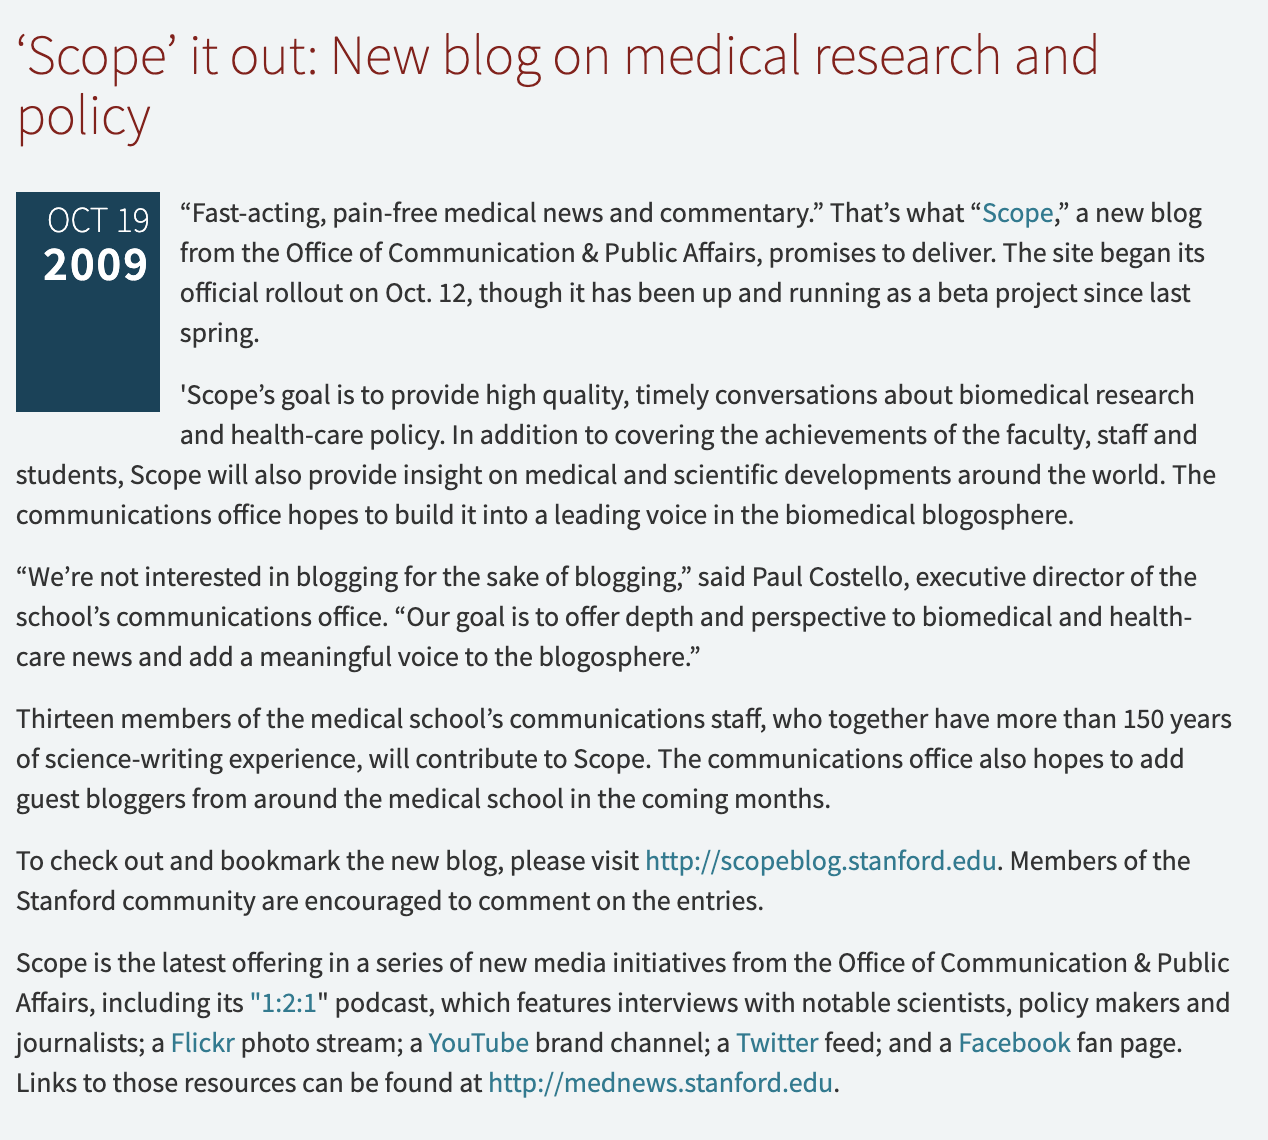 ‘Scope’ it out: New blog on medical research and policy